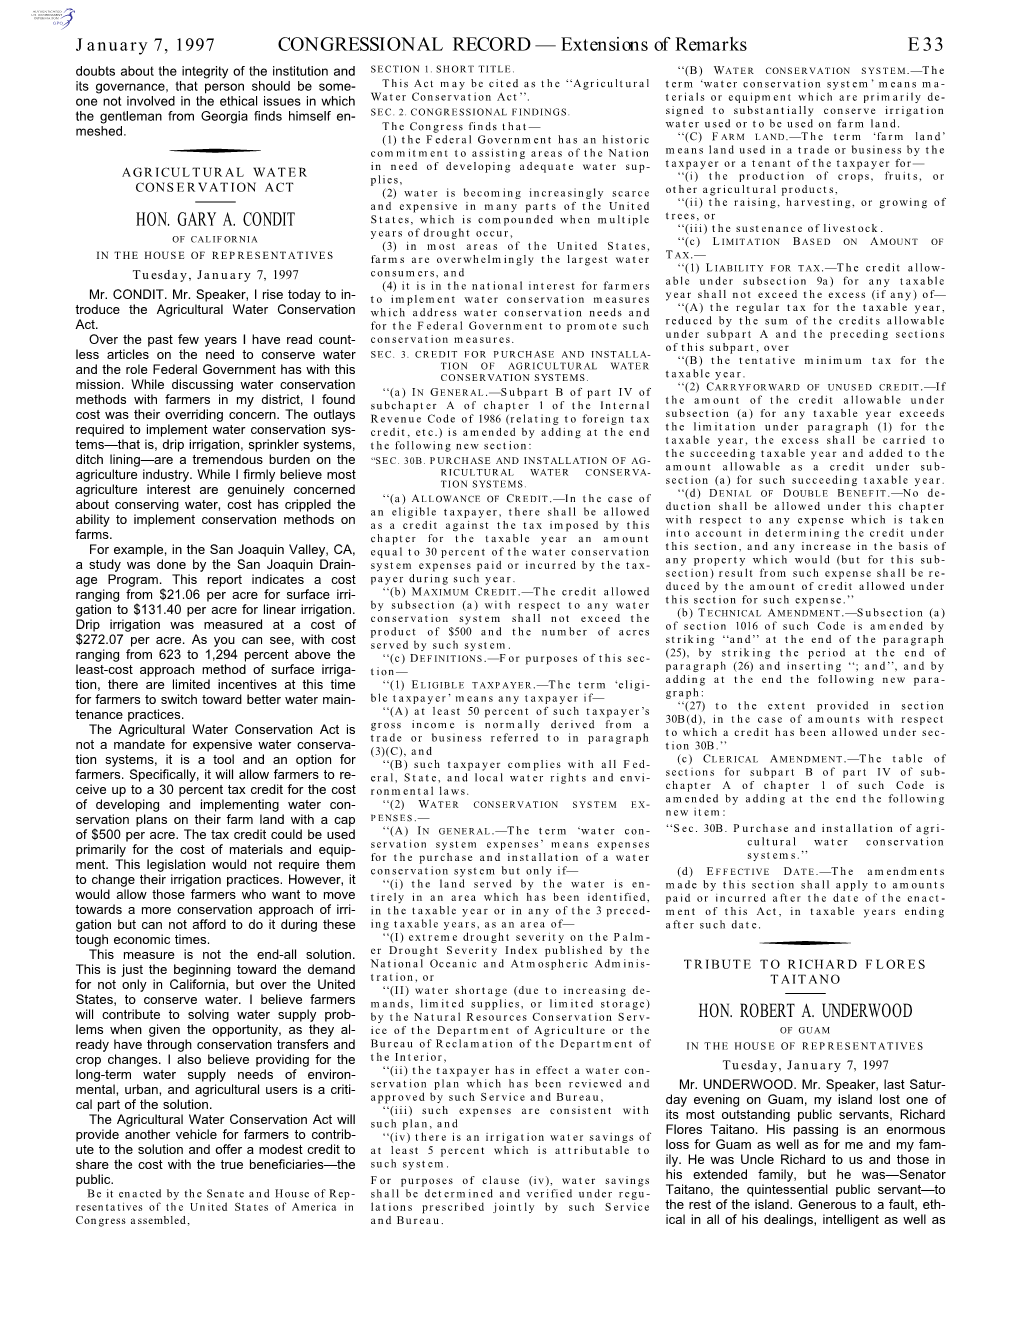 CONGRESSIONAL RECORD— Extensions of Remarks E33 HON. GARY A. CONDIT HON. ROBERT A. UNDERWOOD